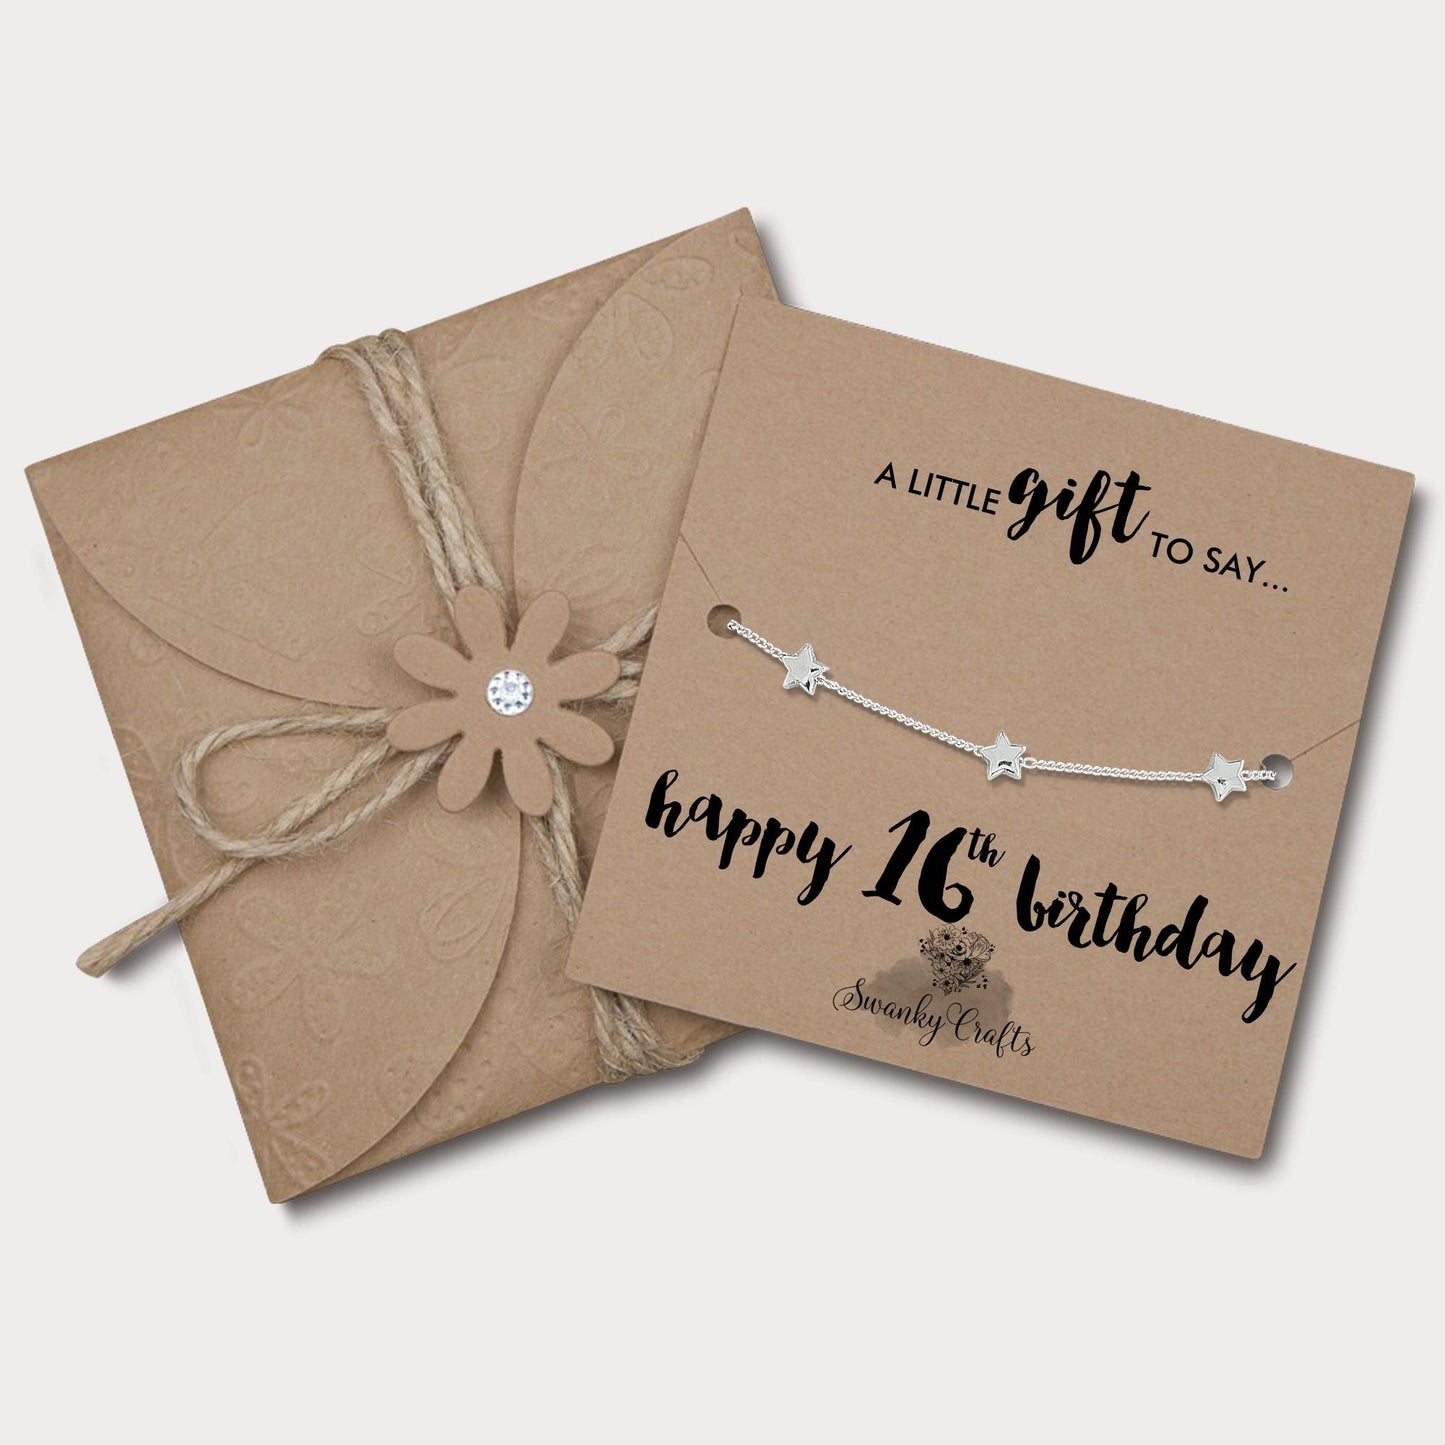 18th Birthday Gift - 18ct Gold Star Bracelet with Card and Gift Wrap